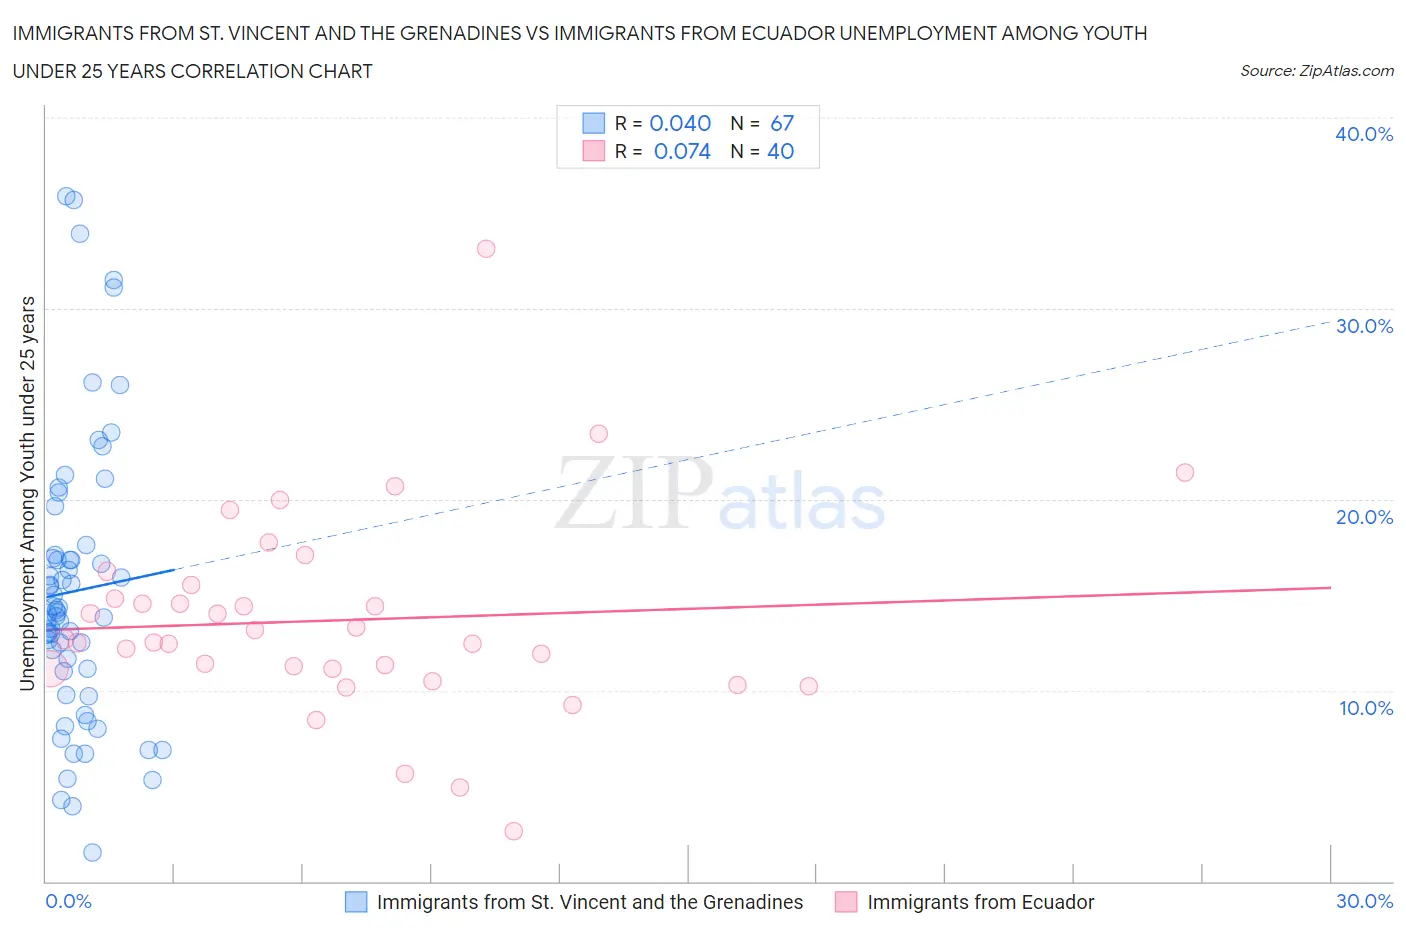 Immigrants from St. Vincent and the Grenadines vs Immigrants from Ecuador Unemployment Among Youth under 25 years